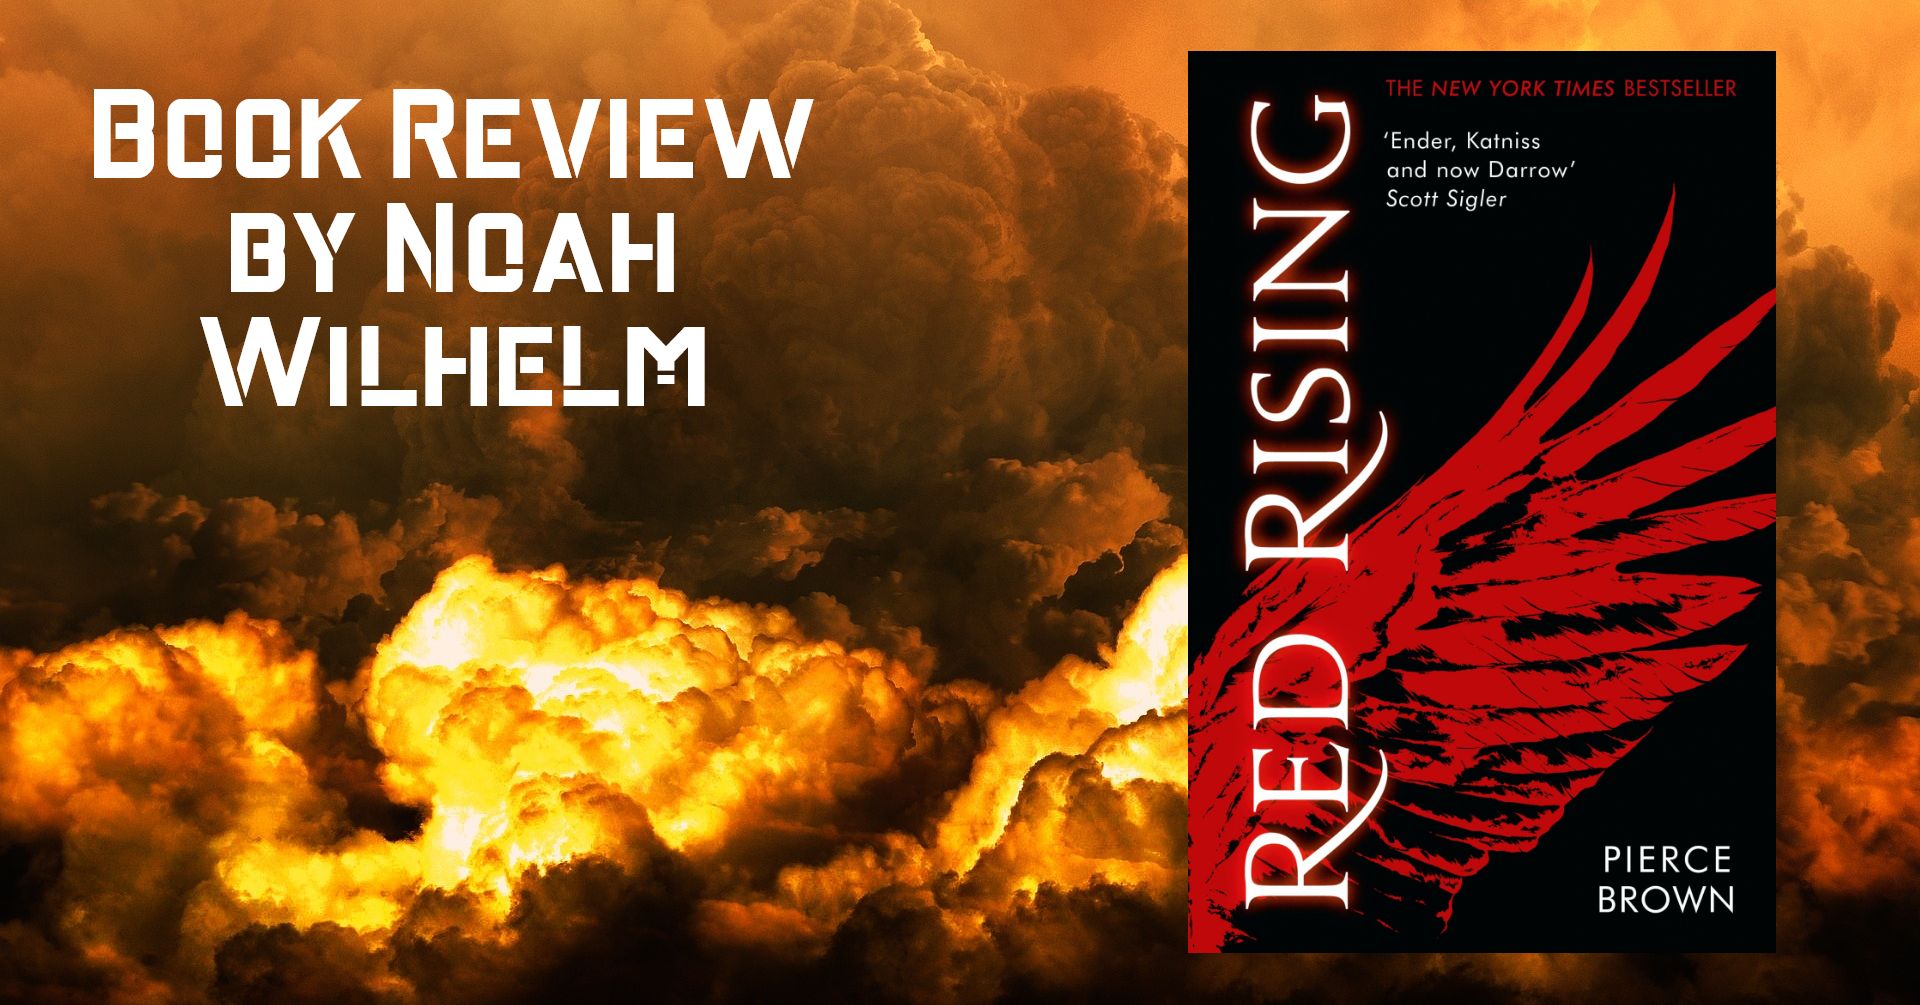 Red Rising Book Cover with angry clouds in background